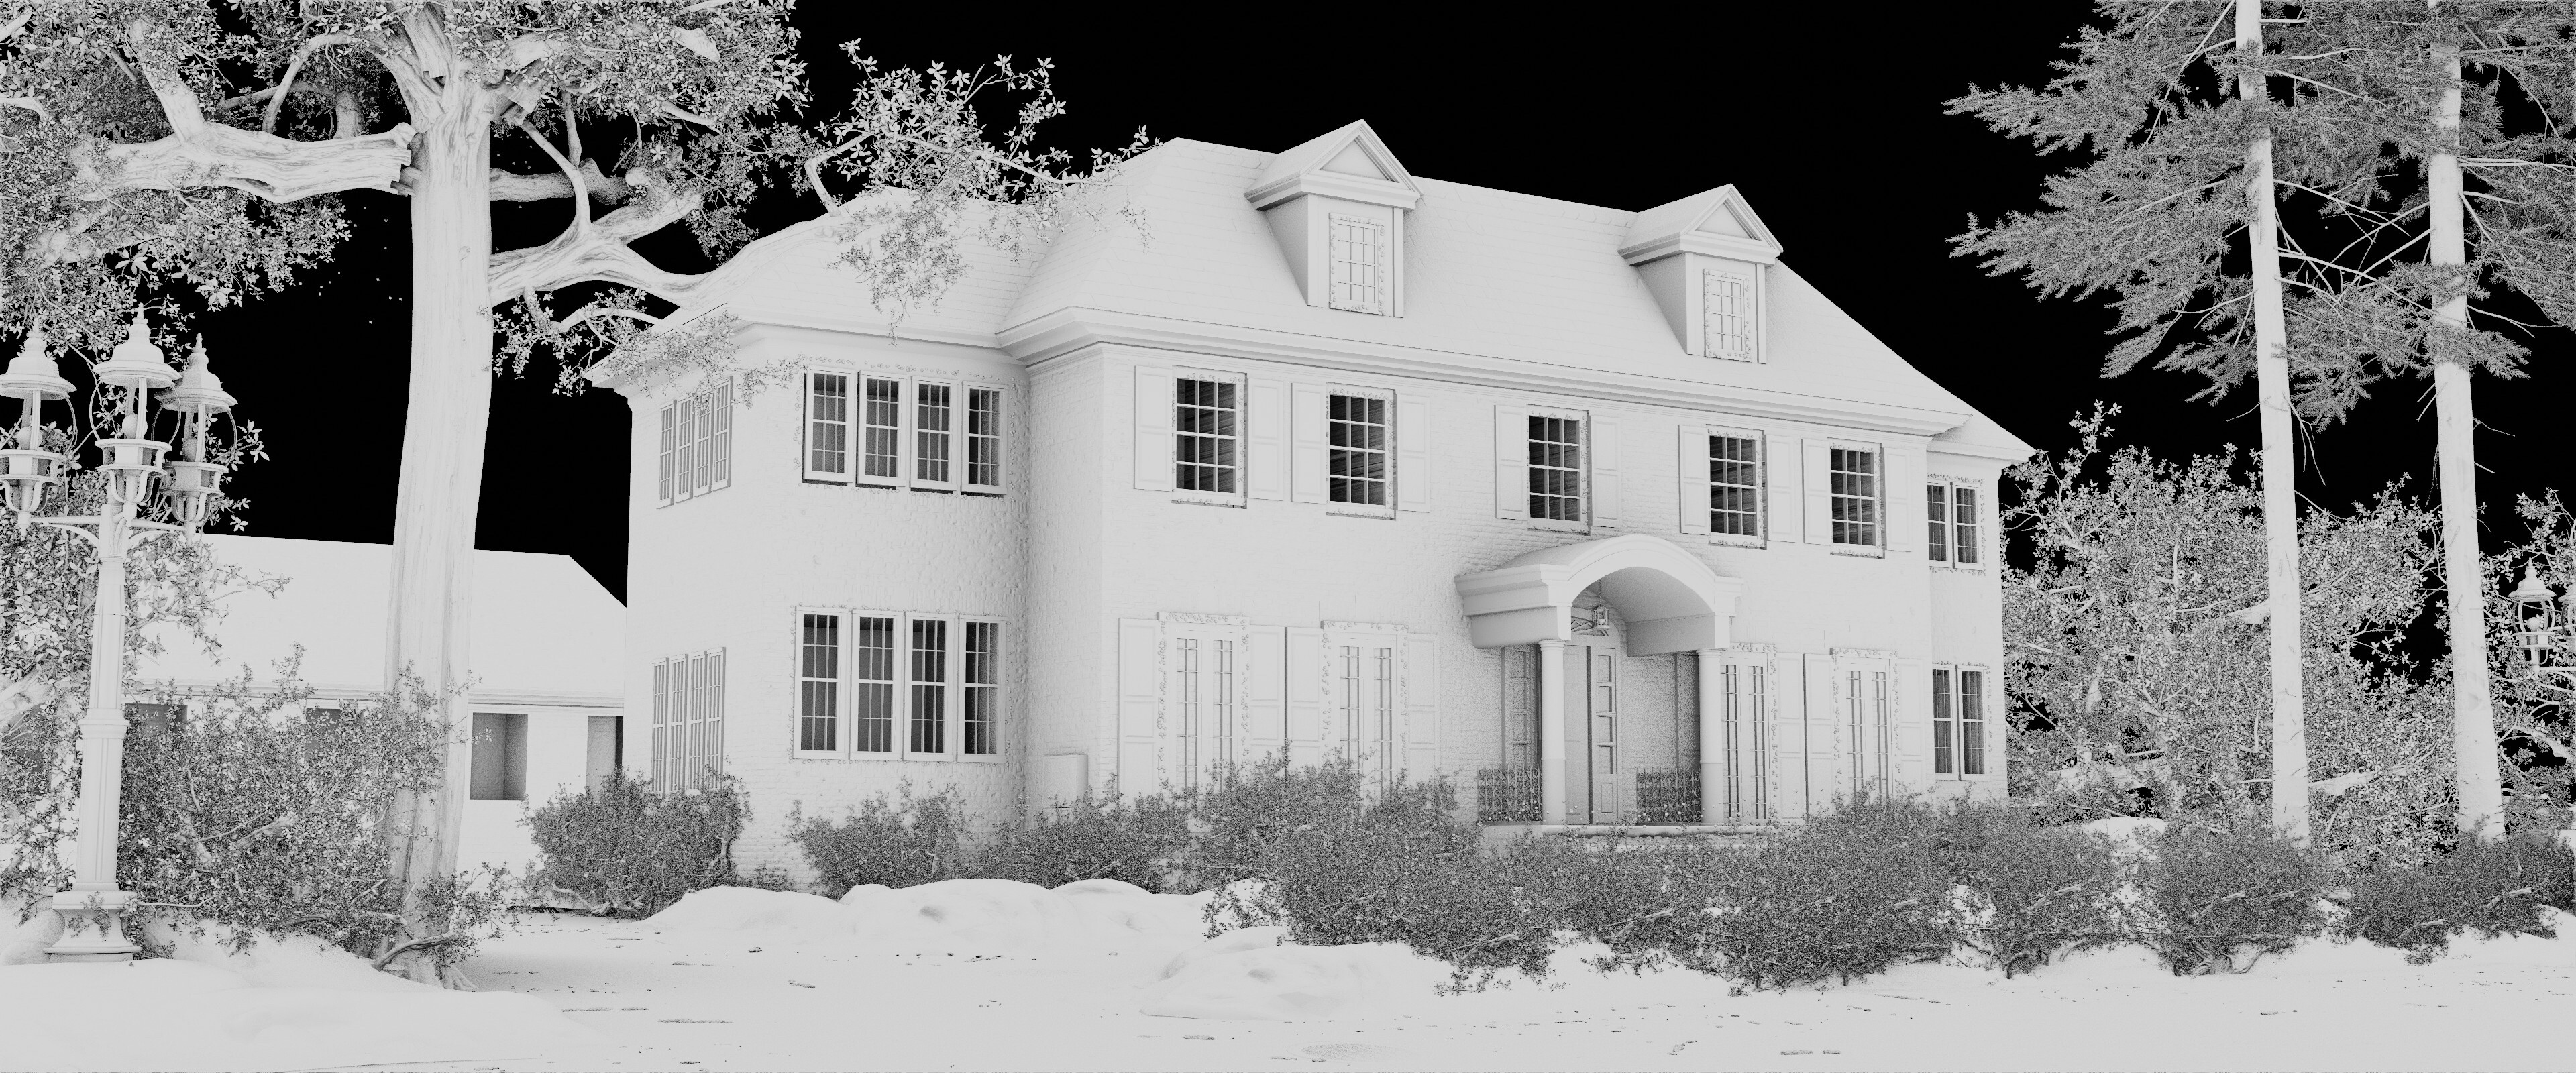 Creating the Home Alone House in Blender 4.1 Finished Projects